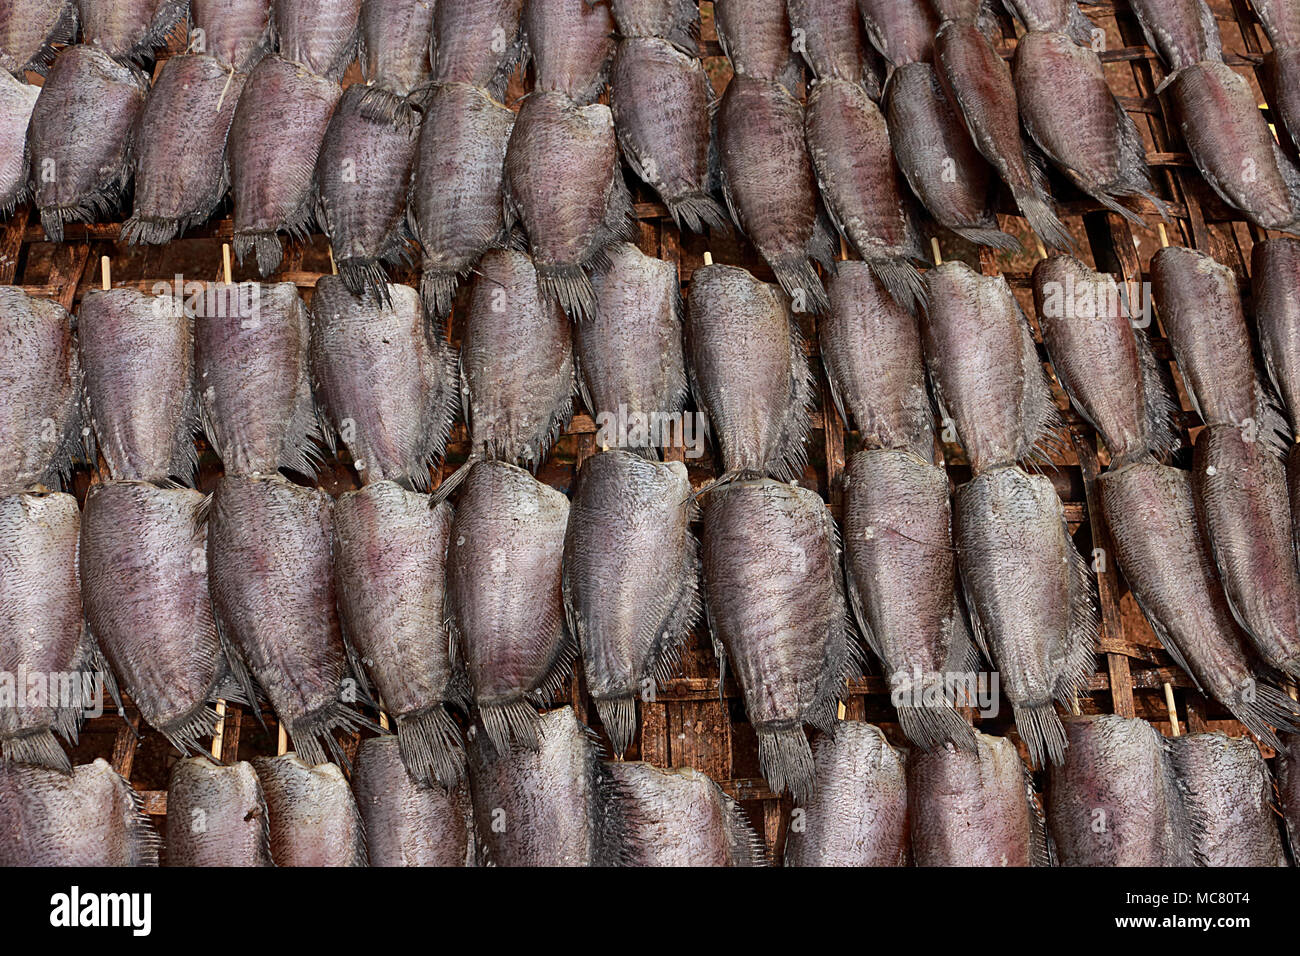 Single sunshine dried fish made from trichogaster pectoralis fish, Put orderly in sunlight on bamboo table. Stock Photo